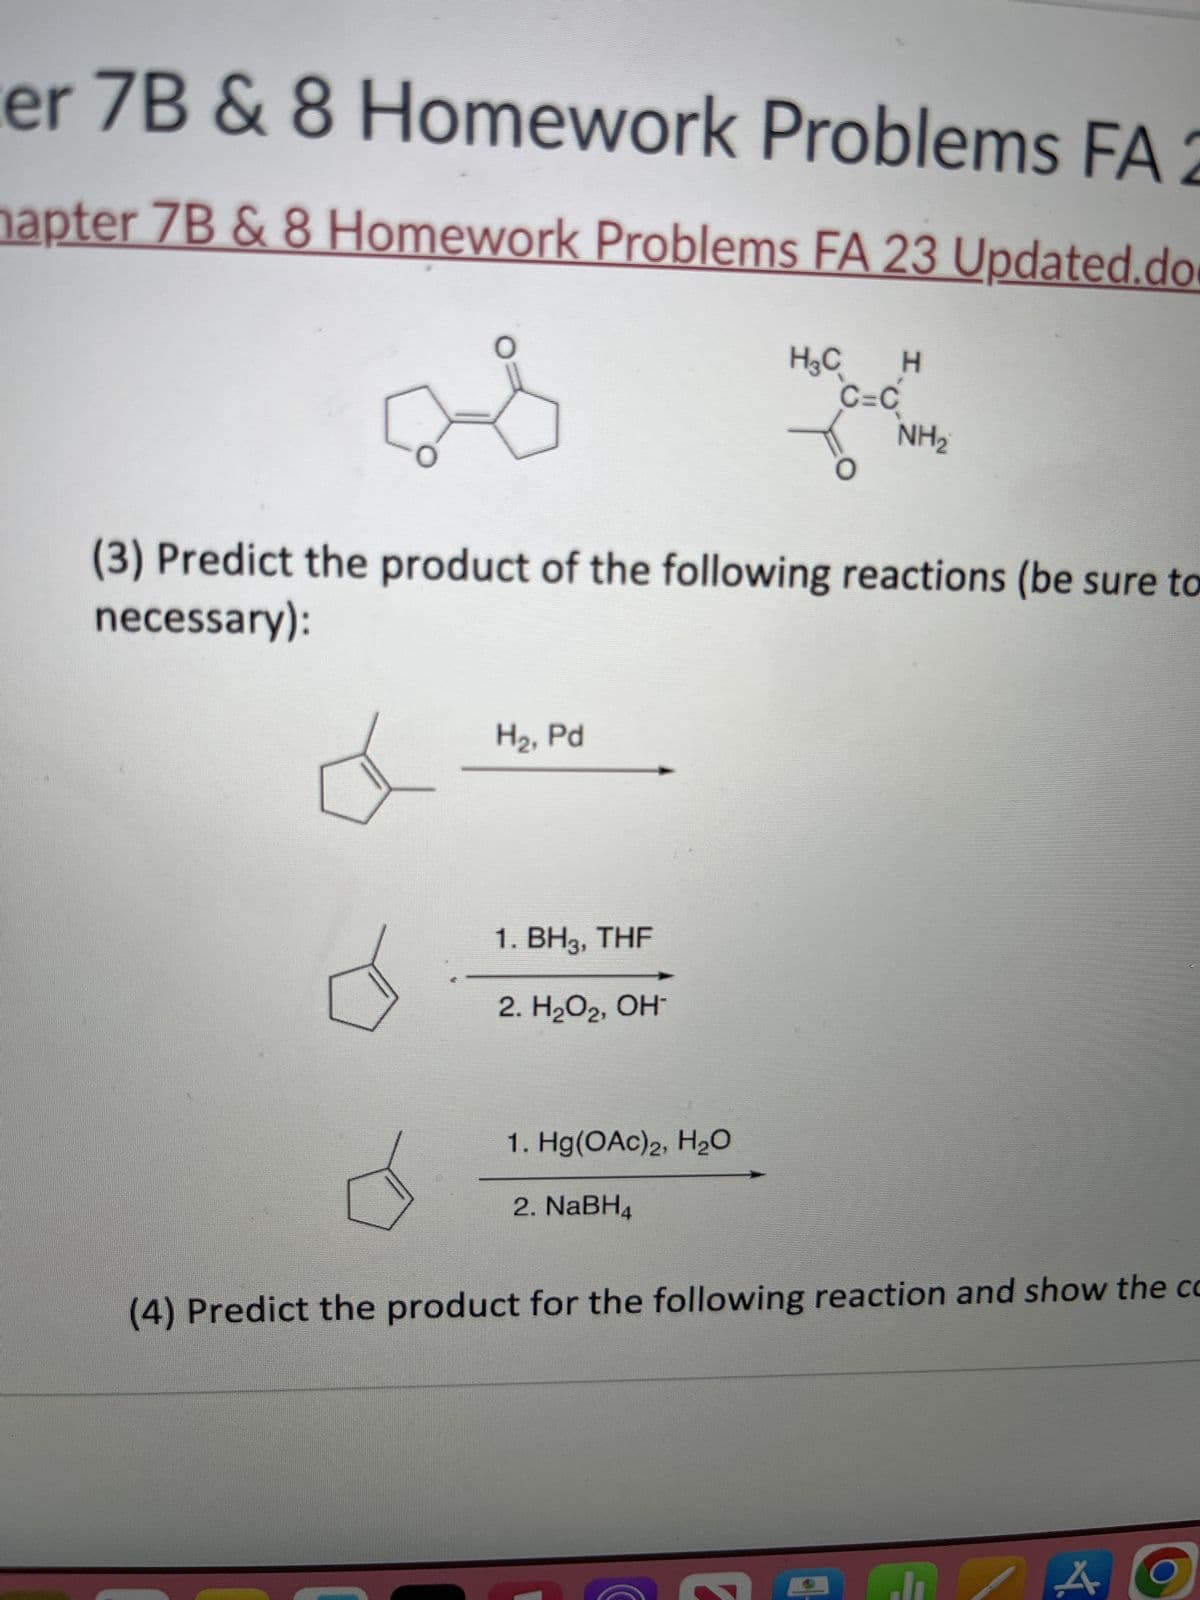 er 7B & 8 Homework Problems FA 2
hapter 7B & 8 Homework Problems FA 23 Updated.do
H₂C H
C=C
O
(3) Predict the product of the following reactions (be sure to
necessary):
H₂, Pd
1. BH3, THF
2. H₂O₂, OH-
NH₂
1. Hg(OAc)2, H₂O
2. NaBH4
(4) Predict the product for the following reaction and show the co
A
O